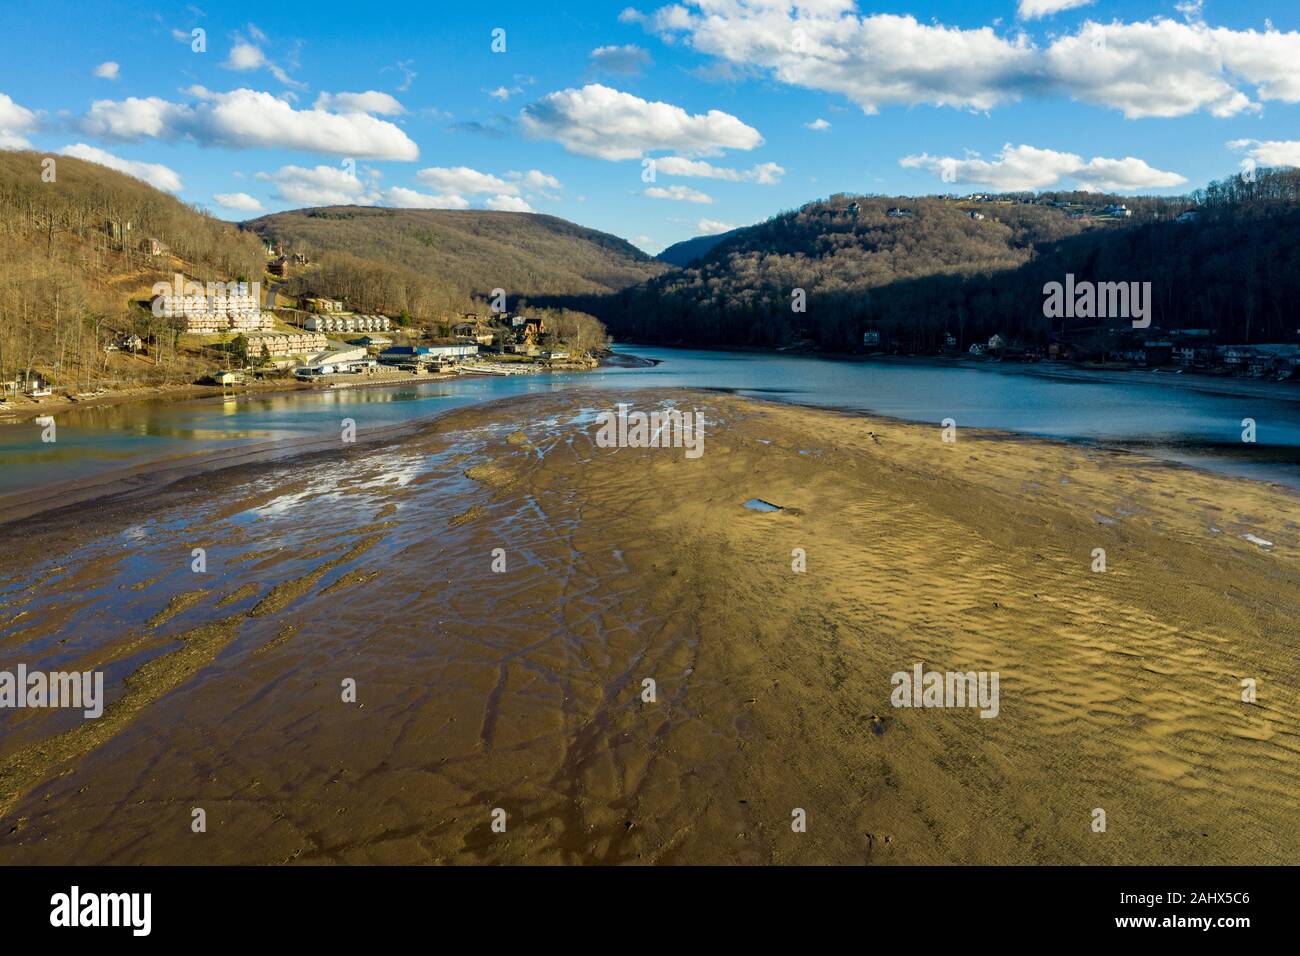 Very low water level in Cheat lake near Morgantown showing a large sand bank where the lake used to be Stock Photo